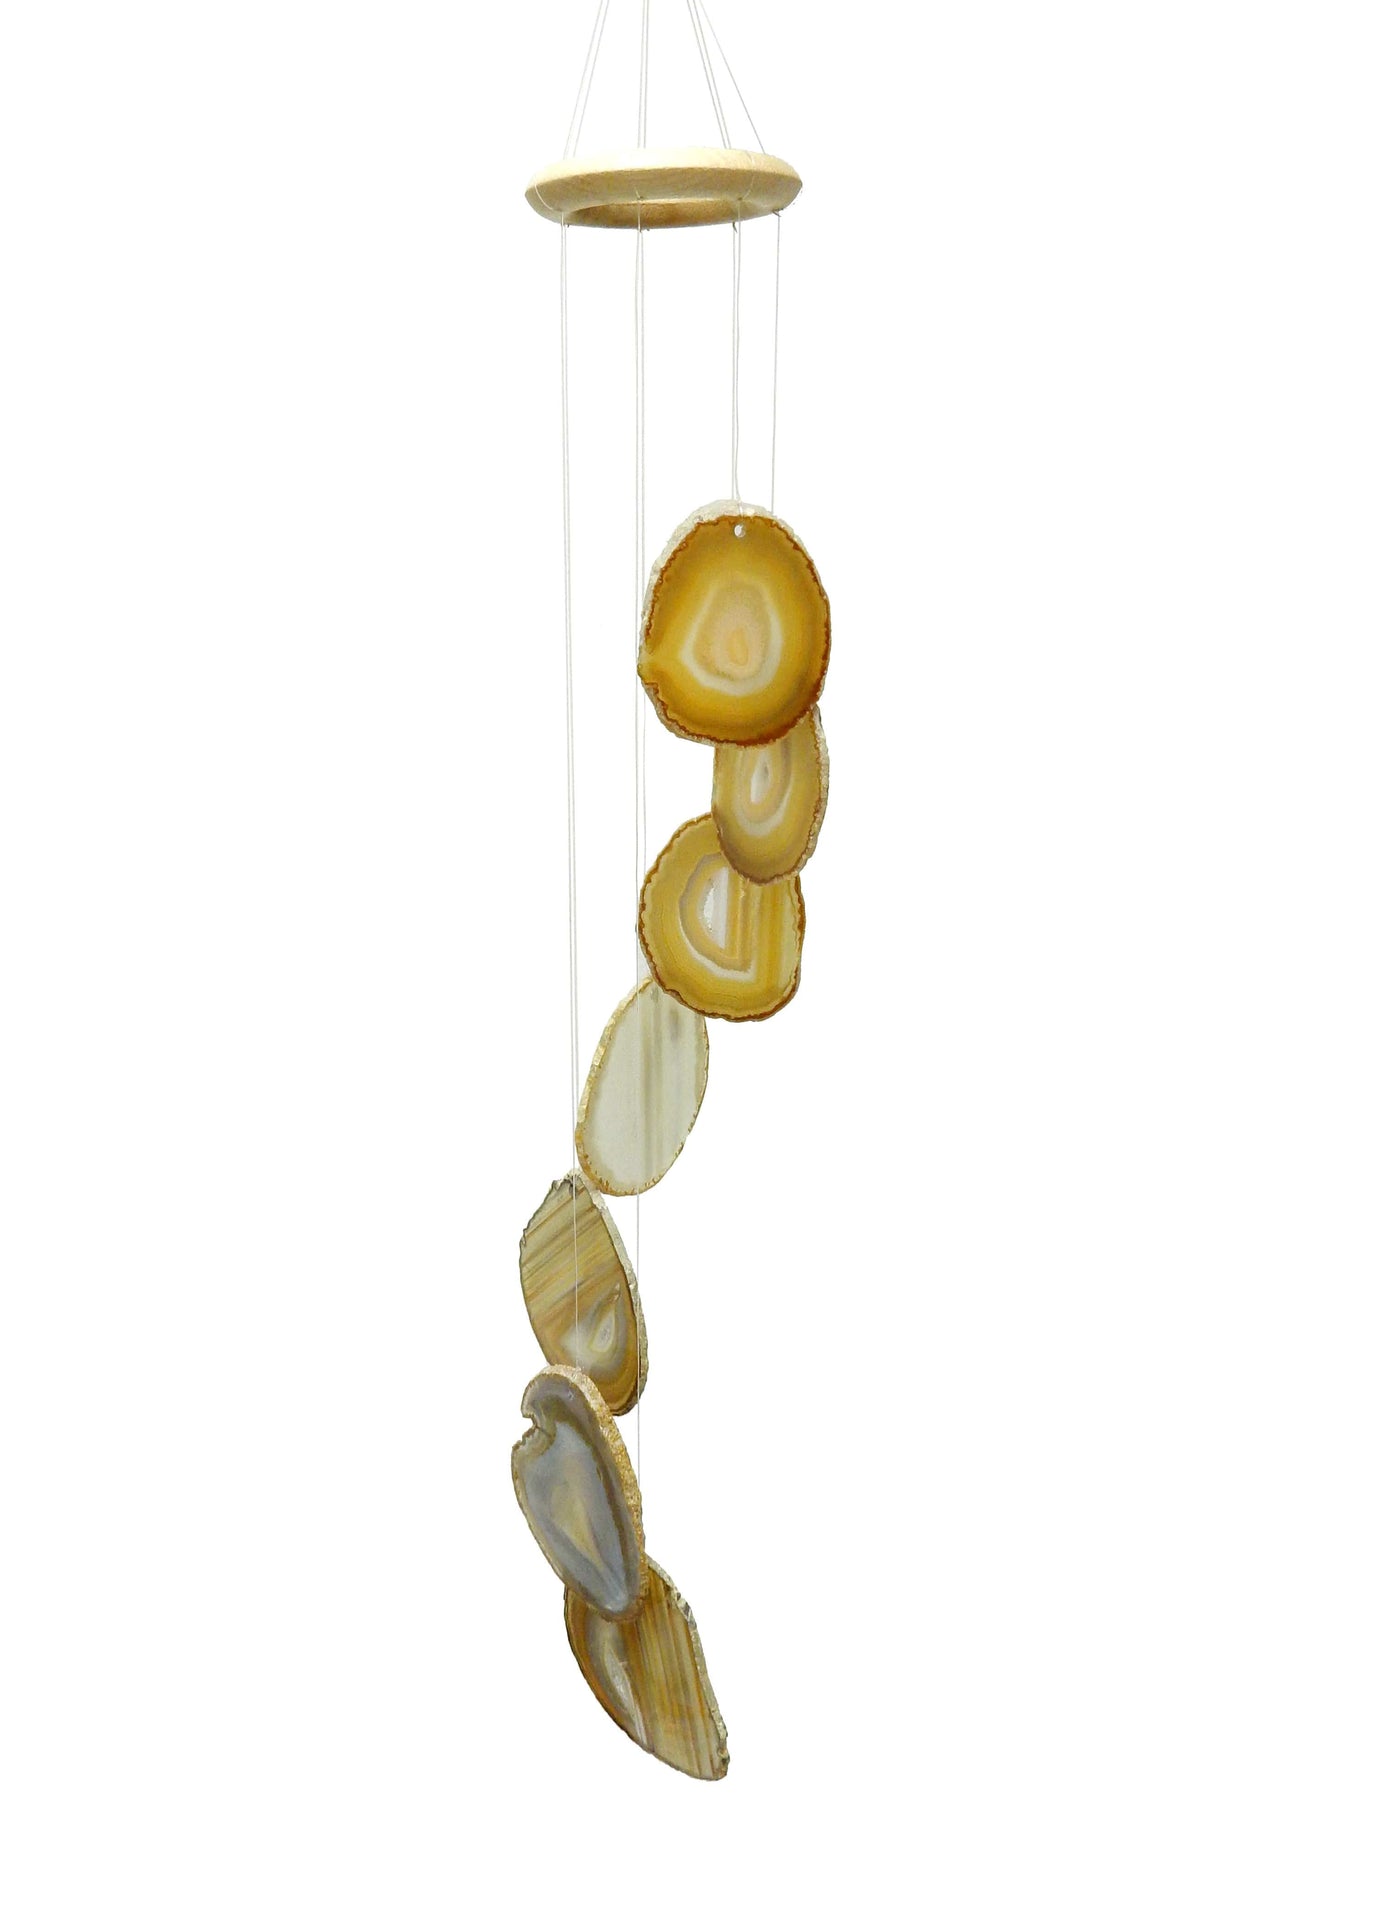 Picture of our natural agate windchime hanging, displayed on a white background.